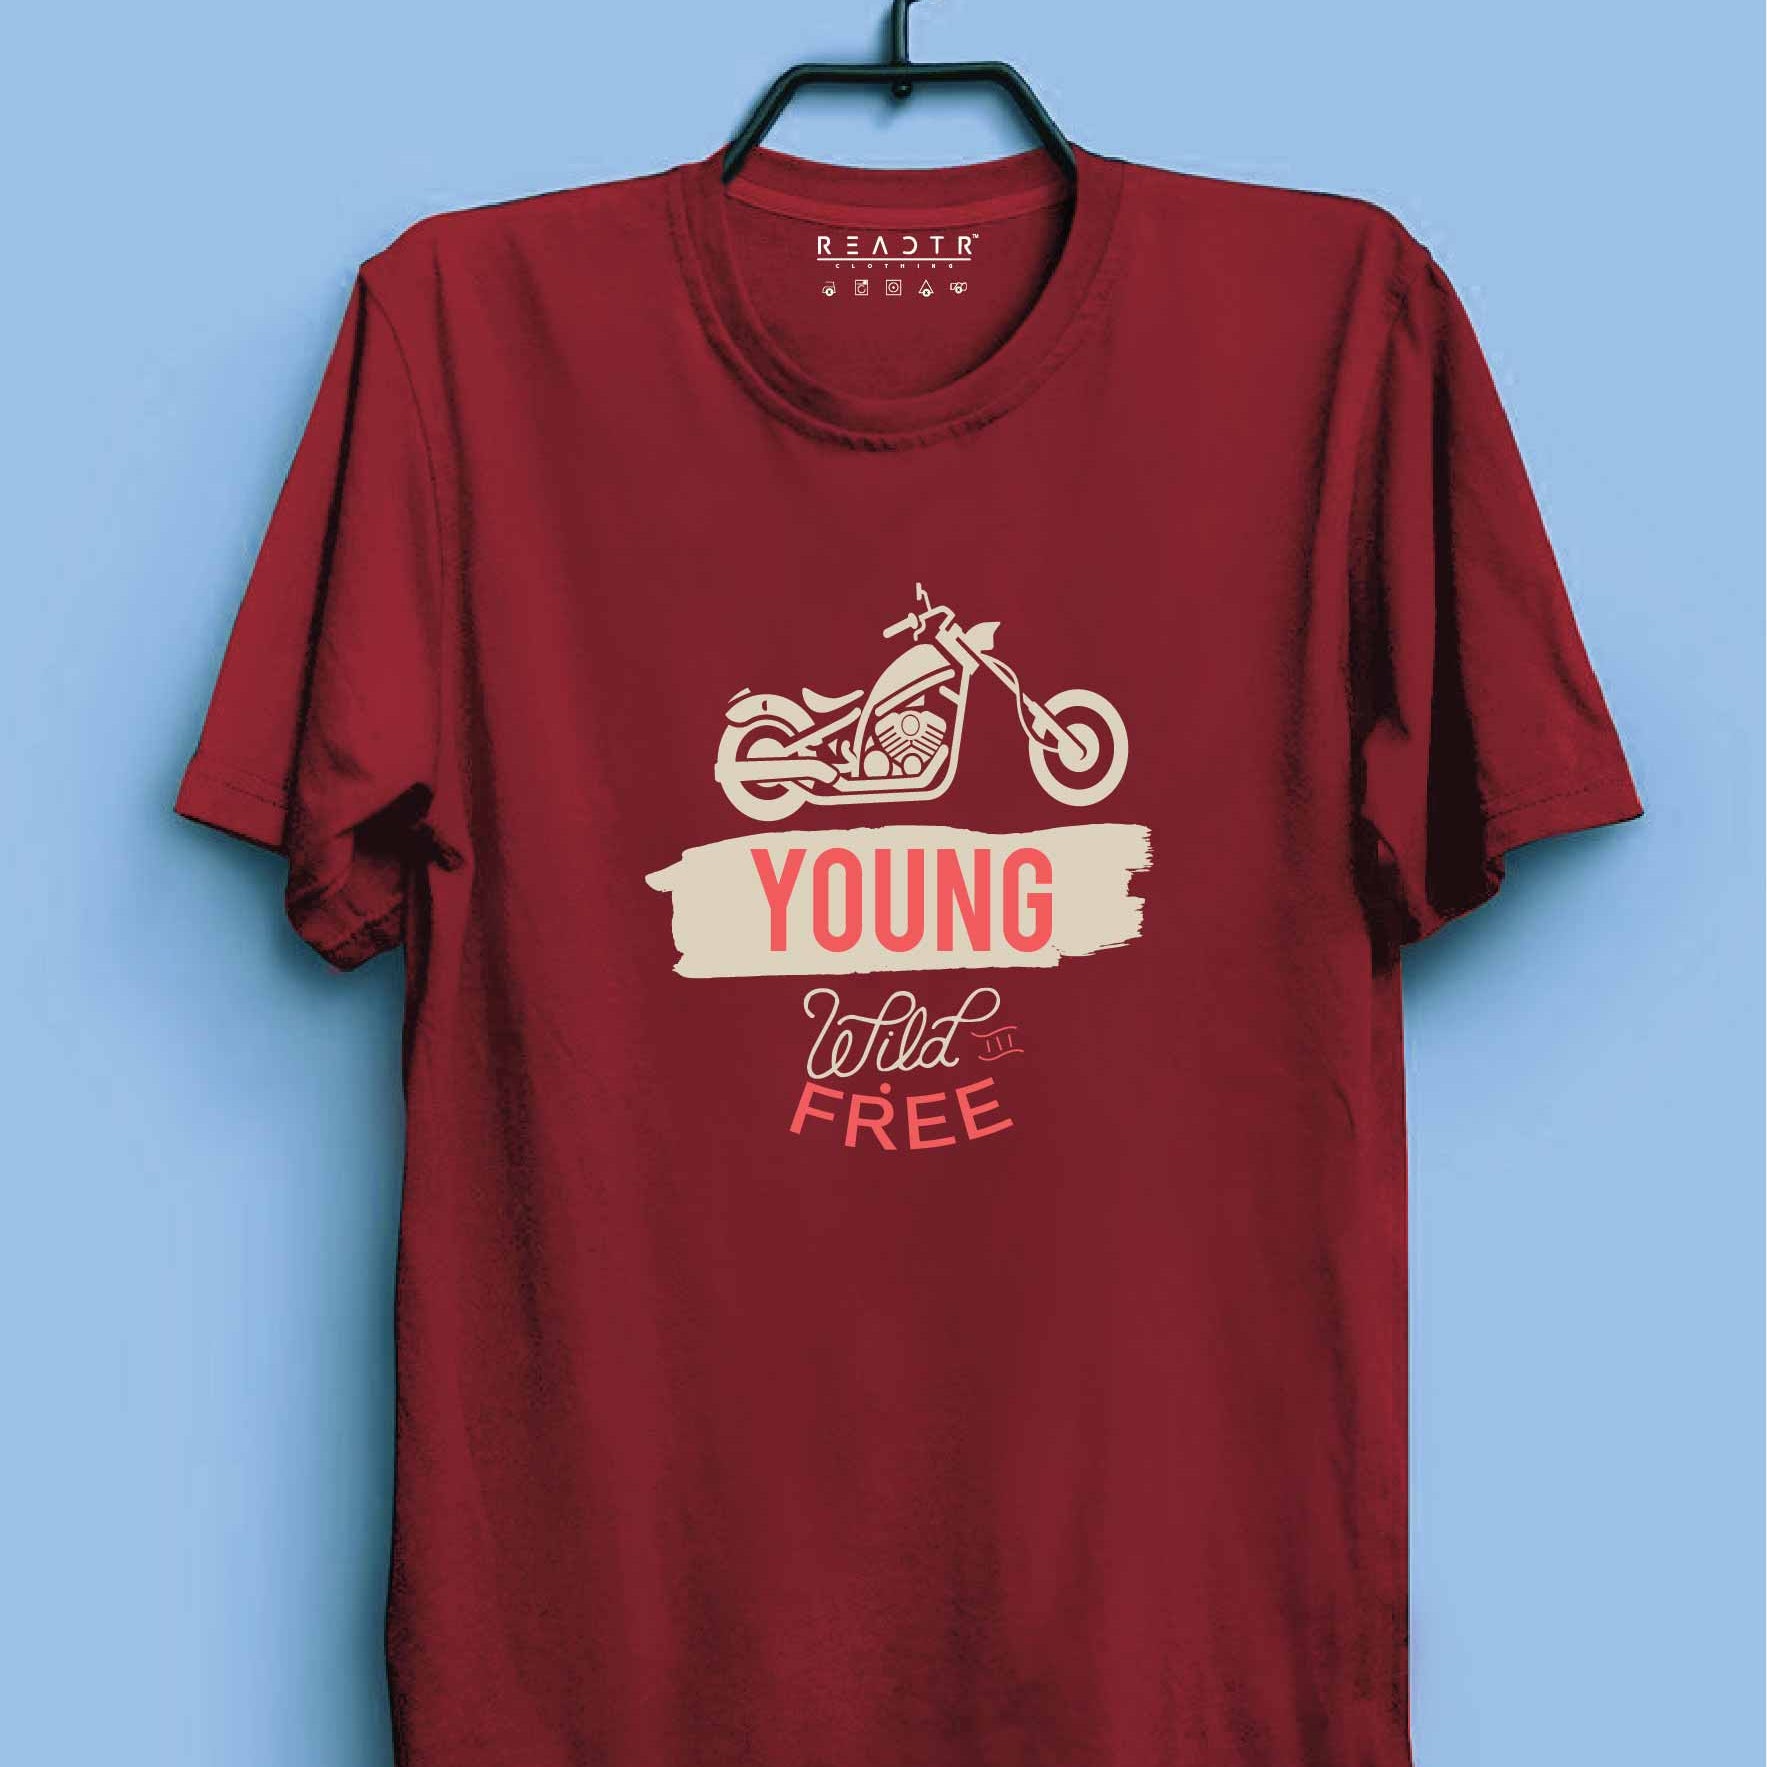 Young Wild and Free Reactr Tshirts For Men - Eyewearlabs